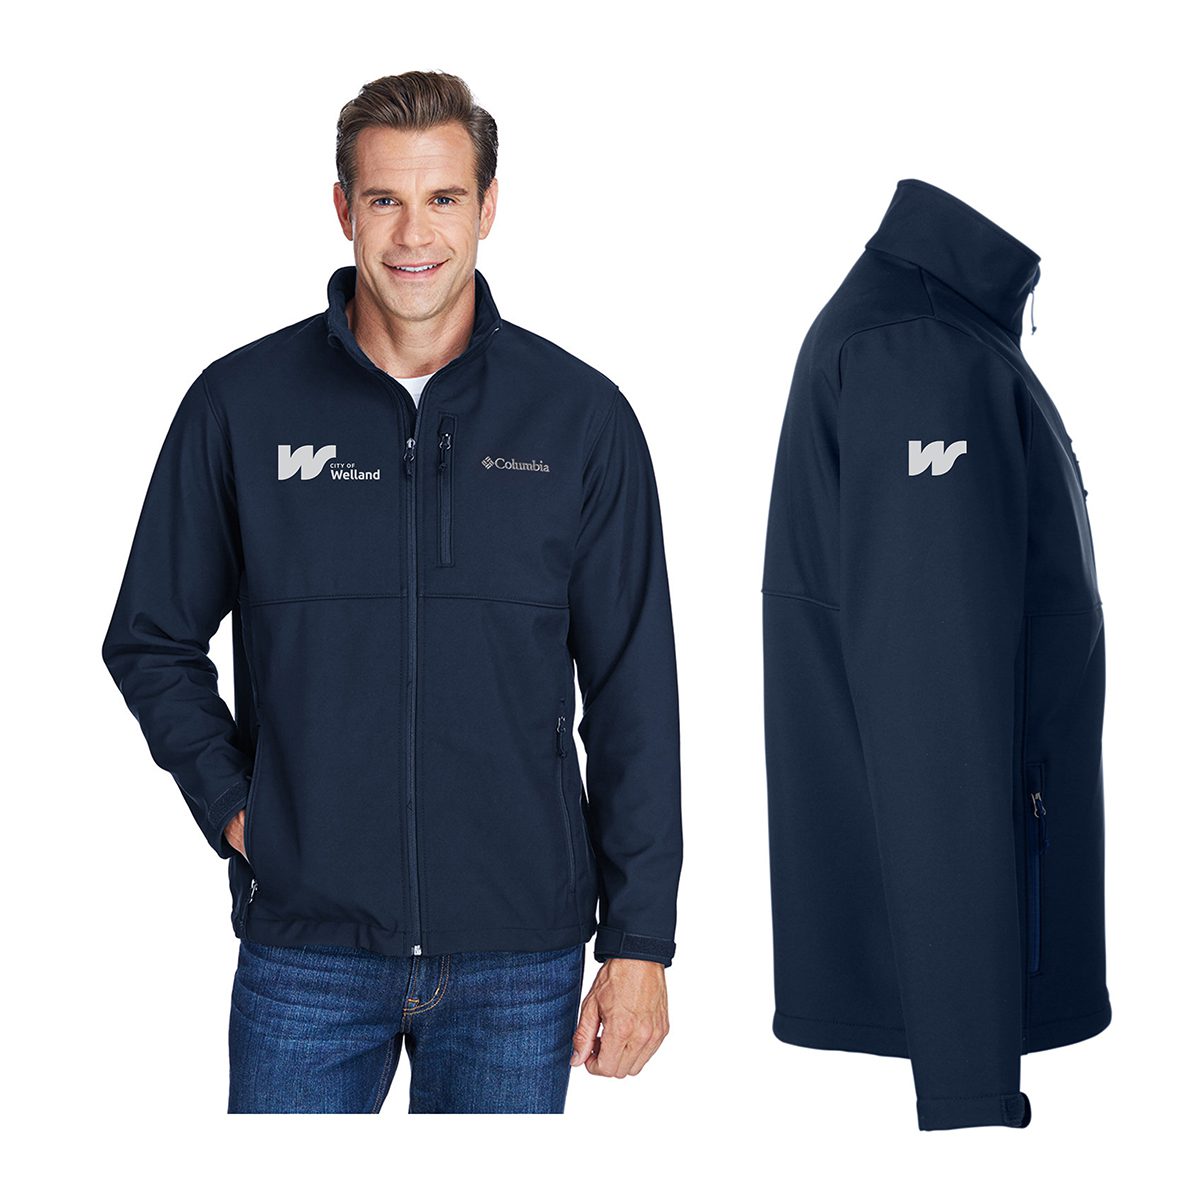 City-of-Welland-Merch-Store_V7-C6044-Collegiate-Navy-Front-and-Side-Light-Grey-Welland-Logo